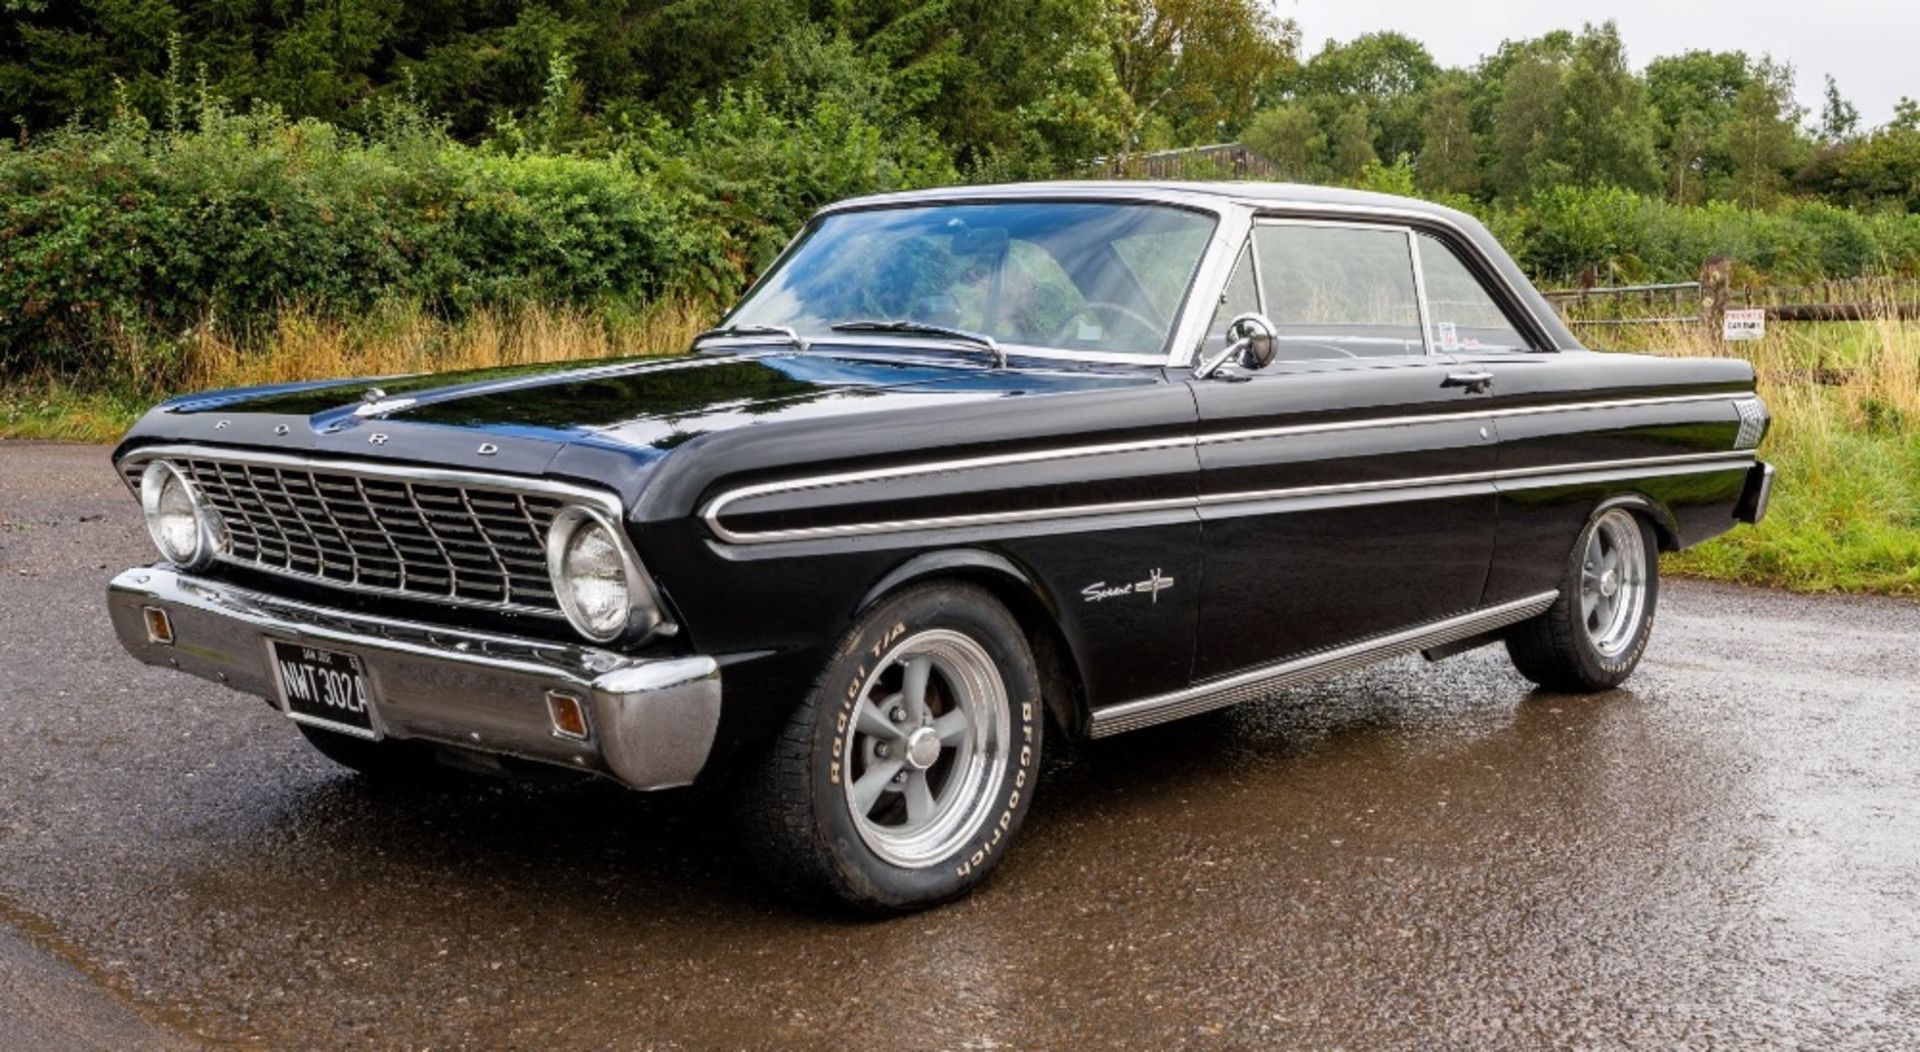 1964 FORD FALCON SPRINT Registration Number: NWT 302A Chassis Number: TBA Recorded Mileage: 41,500 - Image 3 of 16